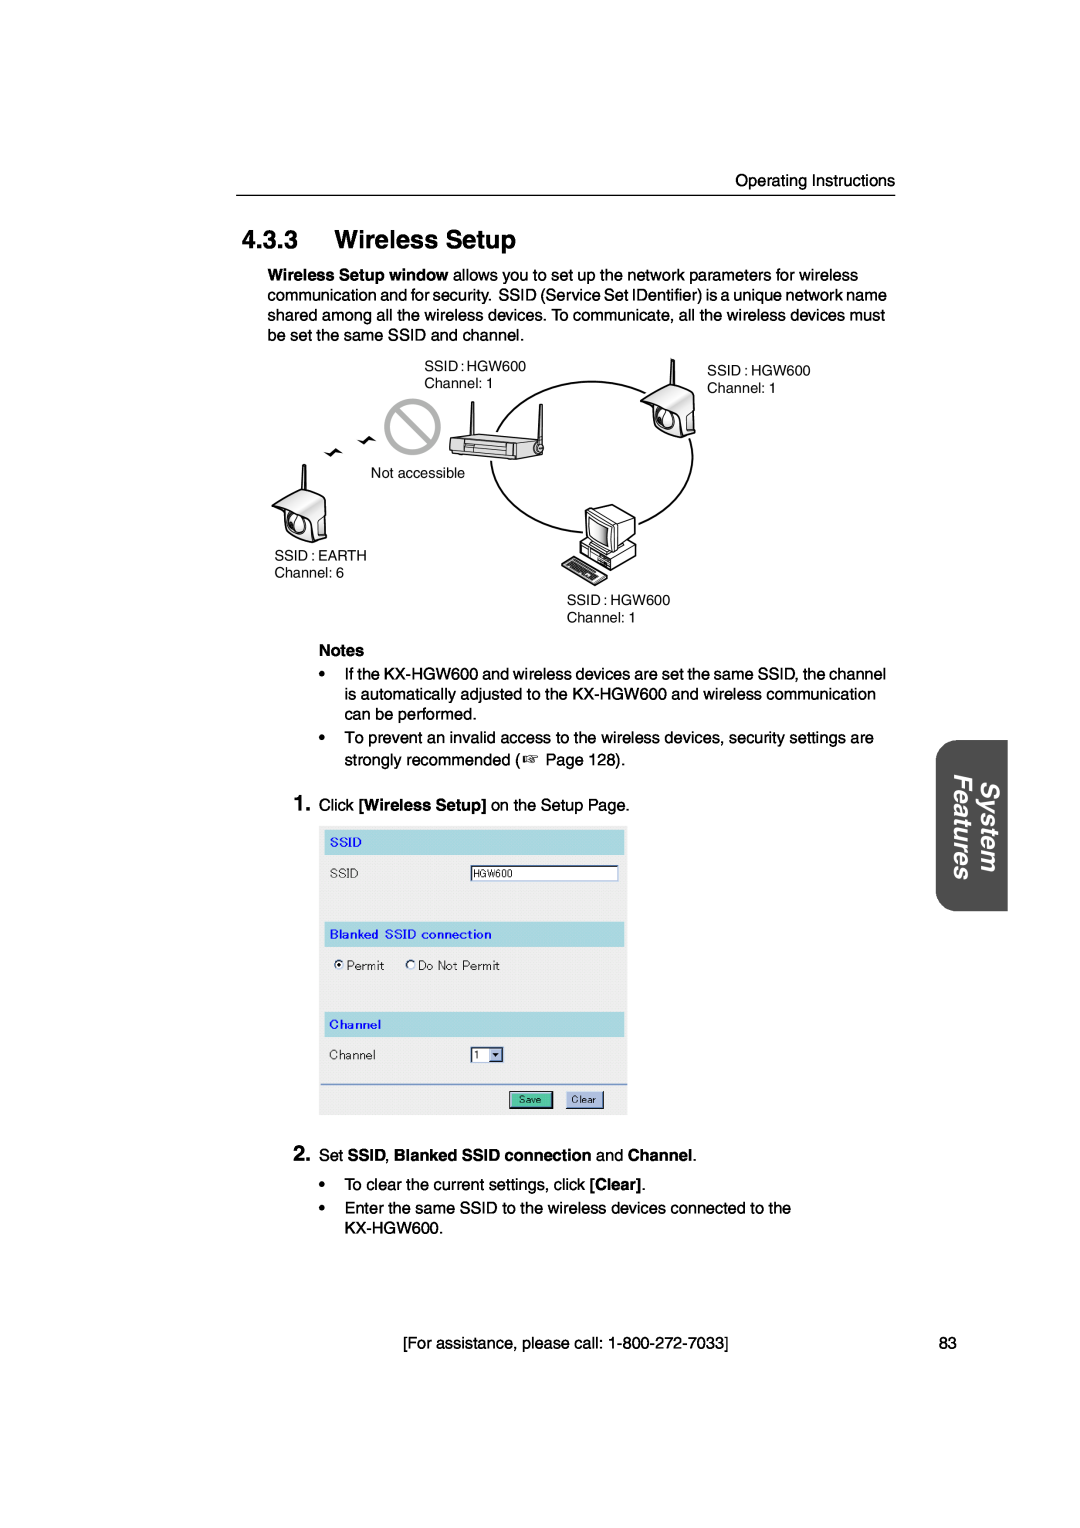 Panasonic KX-HGW600 manual Wireless Setup, Features, System, Set SSID, Blanked SSID connection and Channel 